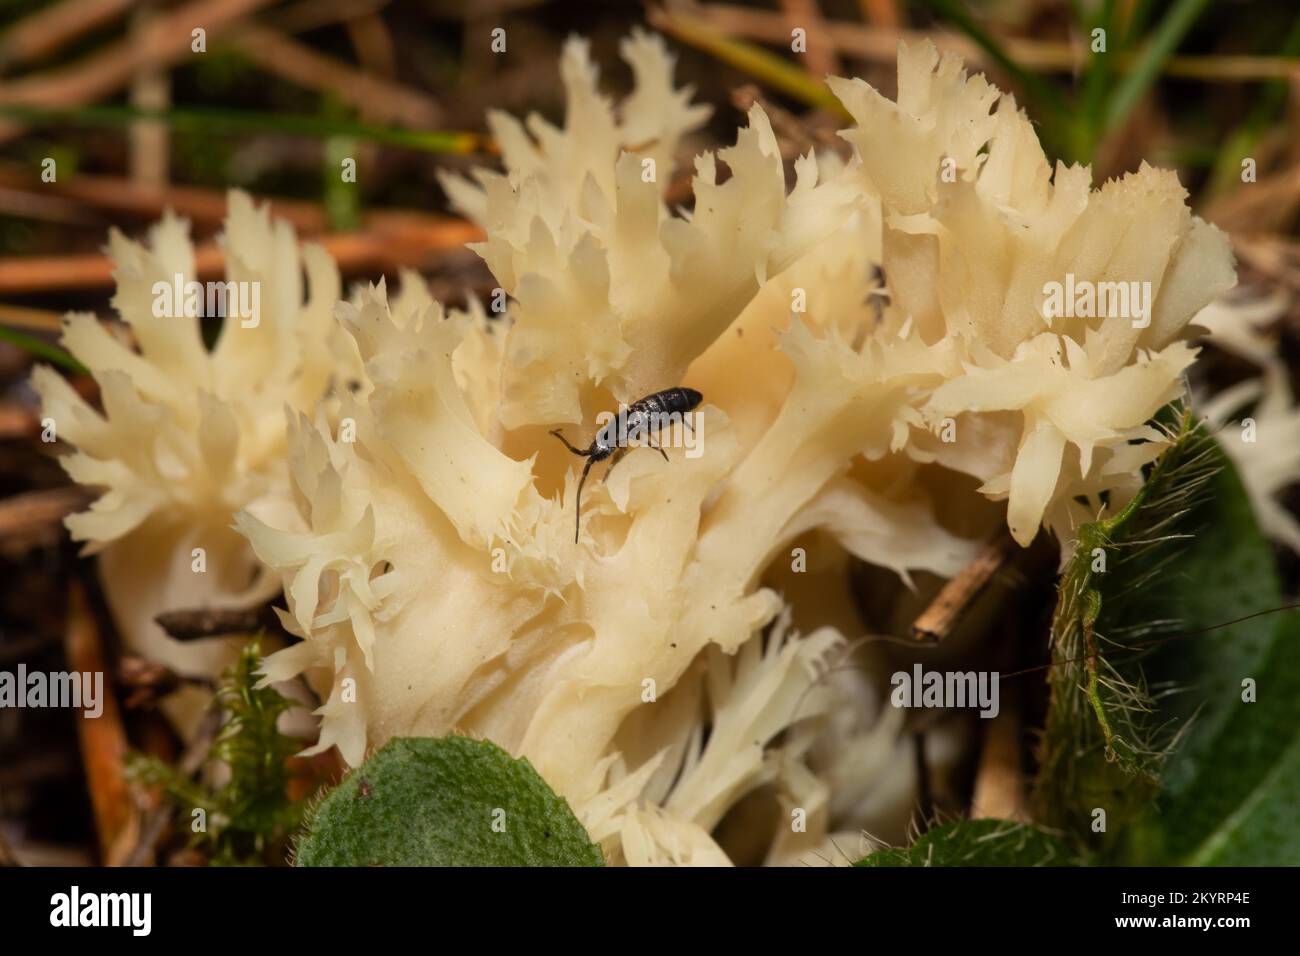 Comb coral fruiting body some brown-white branches with beetle Stock Photo